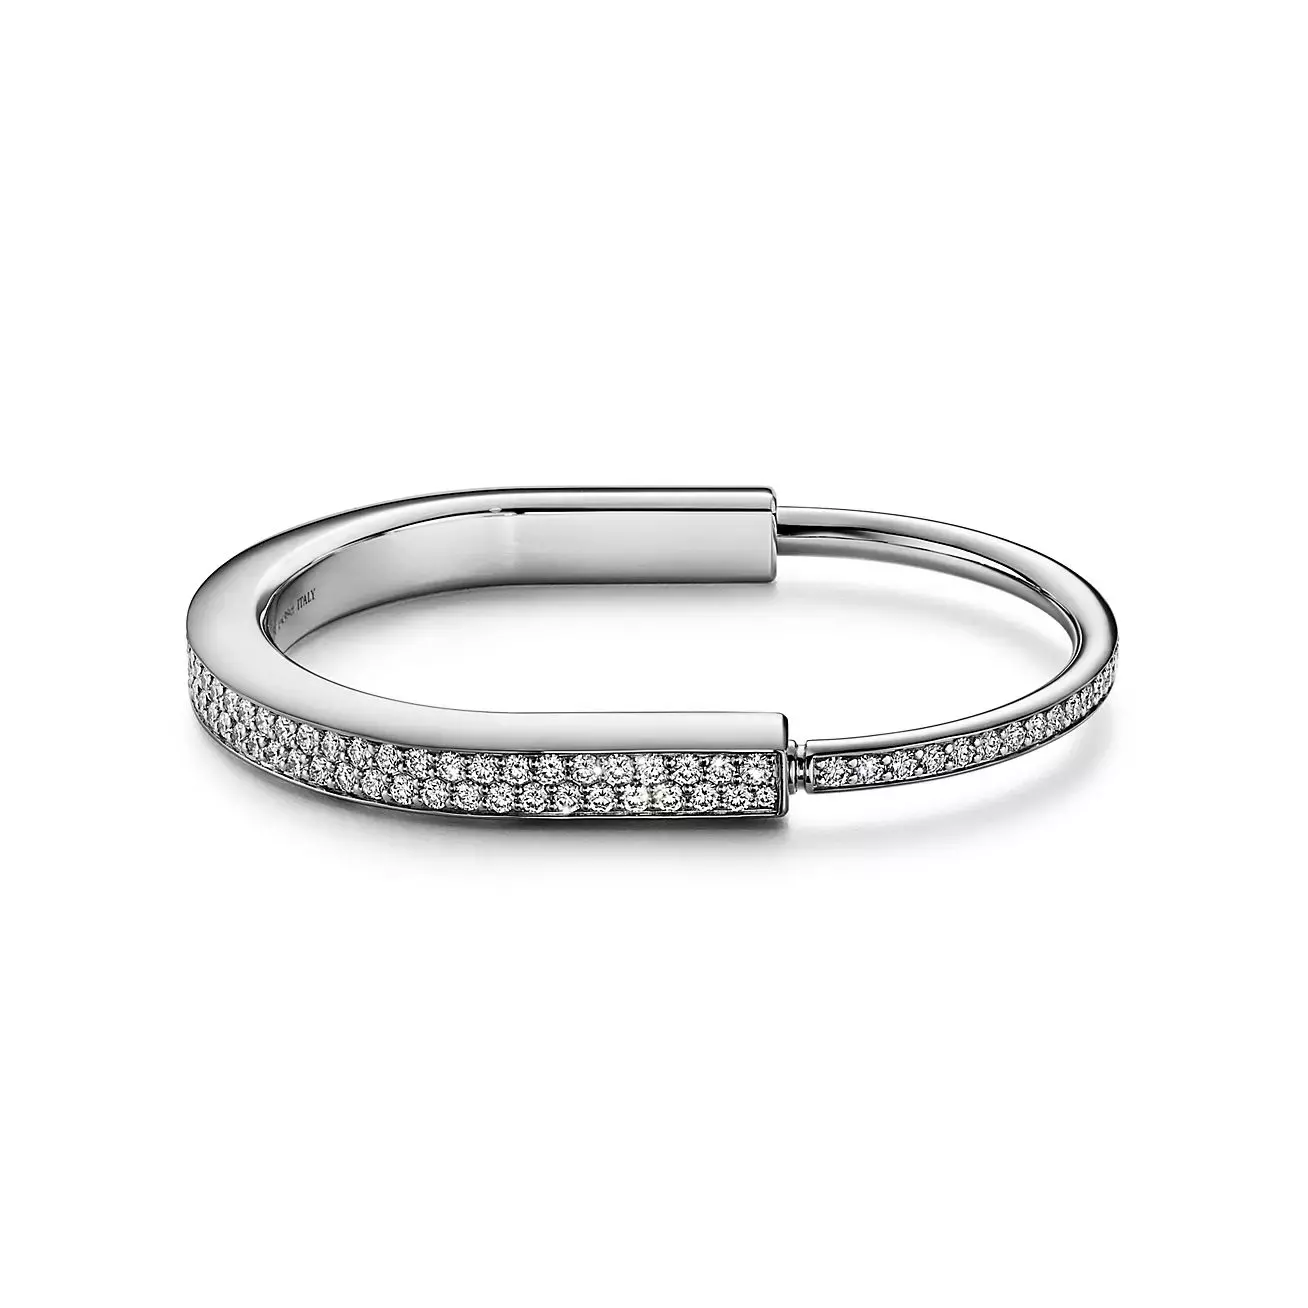 Tiffany Co. Lock Bangle in White Gold with Full Pave Diamonds